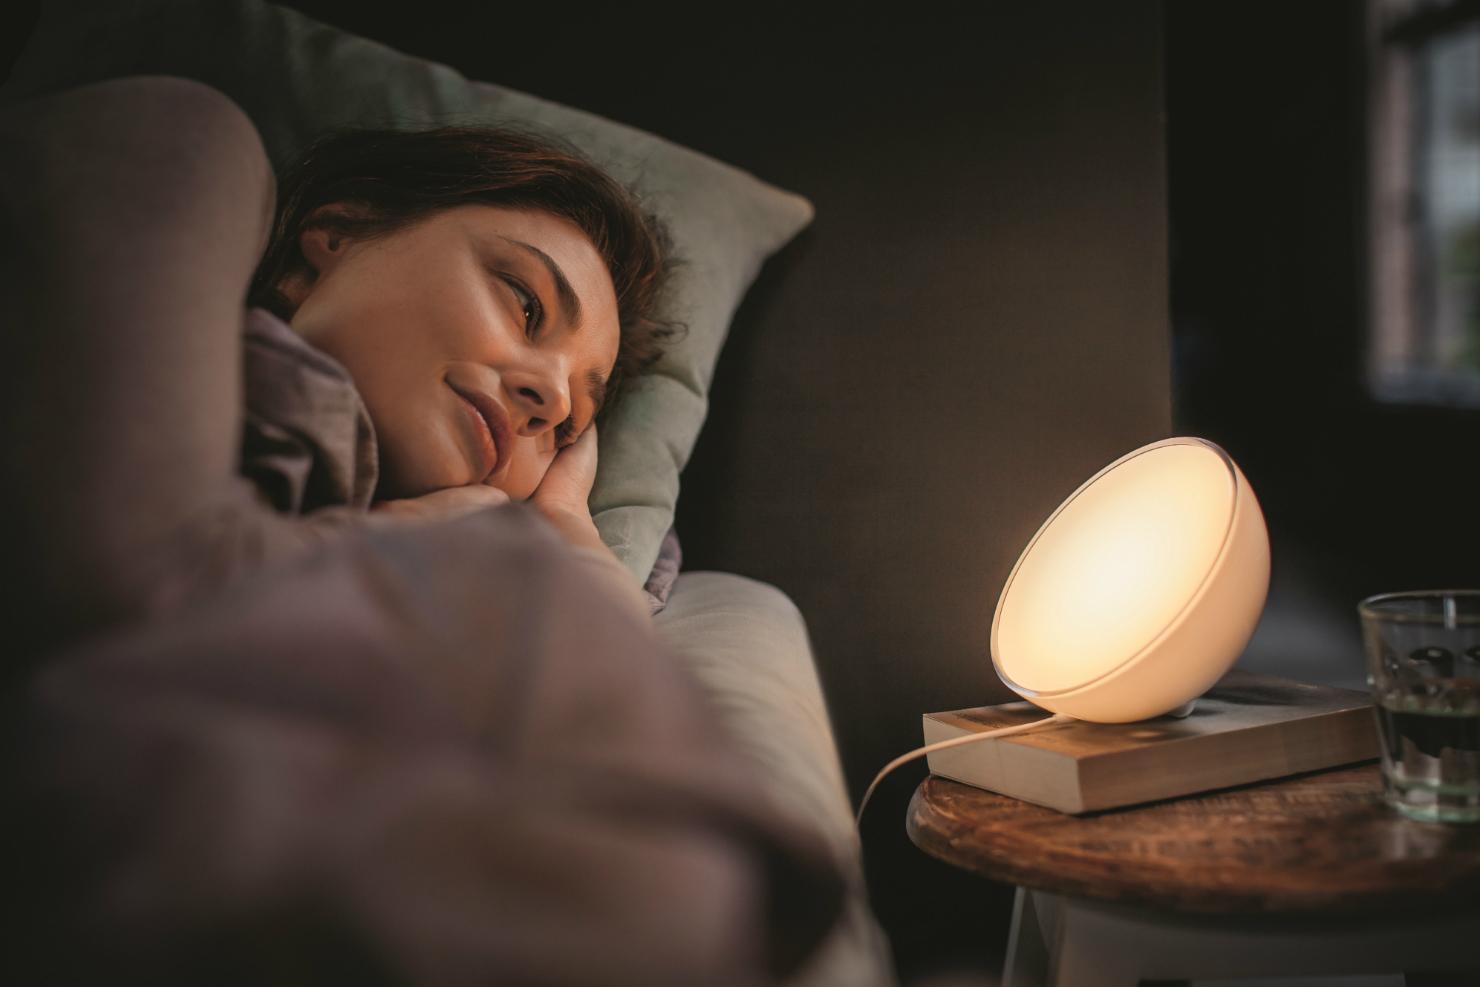 philips hue go is a nifty looking portable led light bed